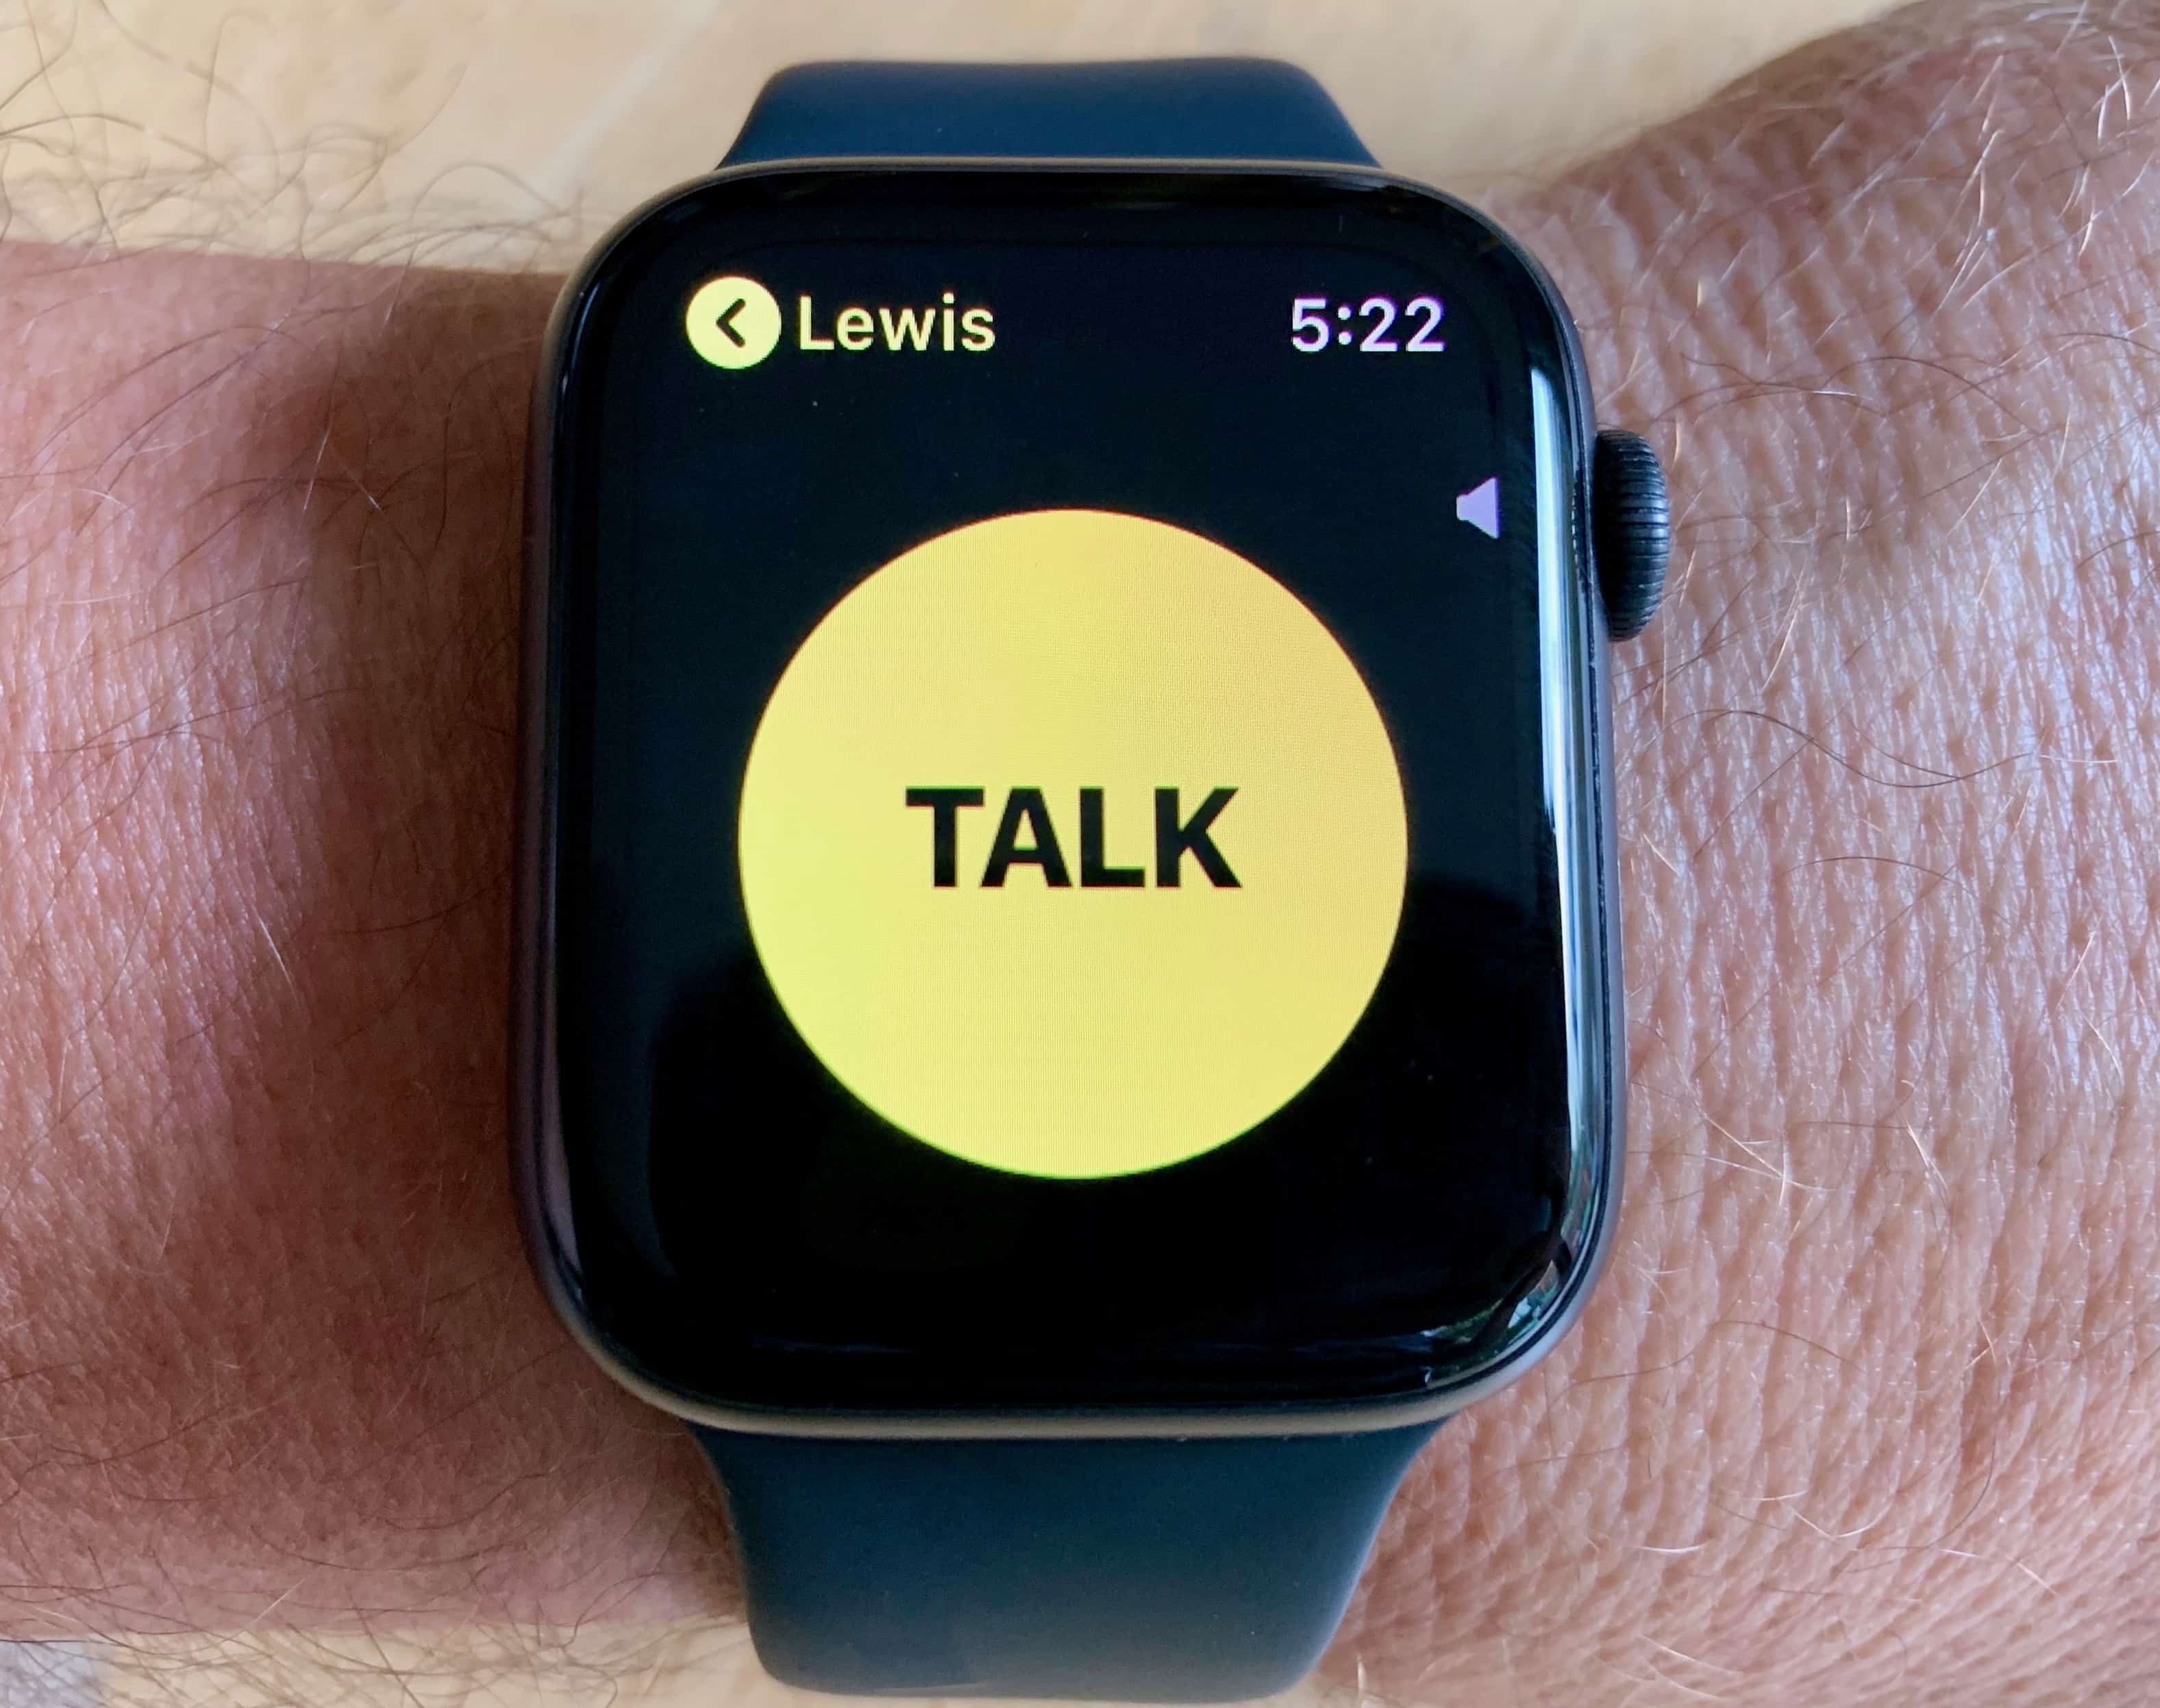 The Apple Watch Walkie Talkie app is a great way to chat with family and friends.